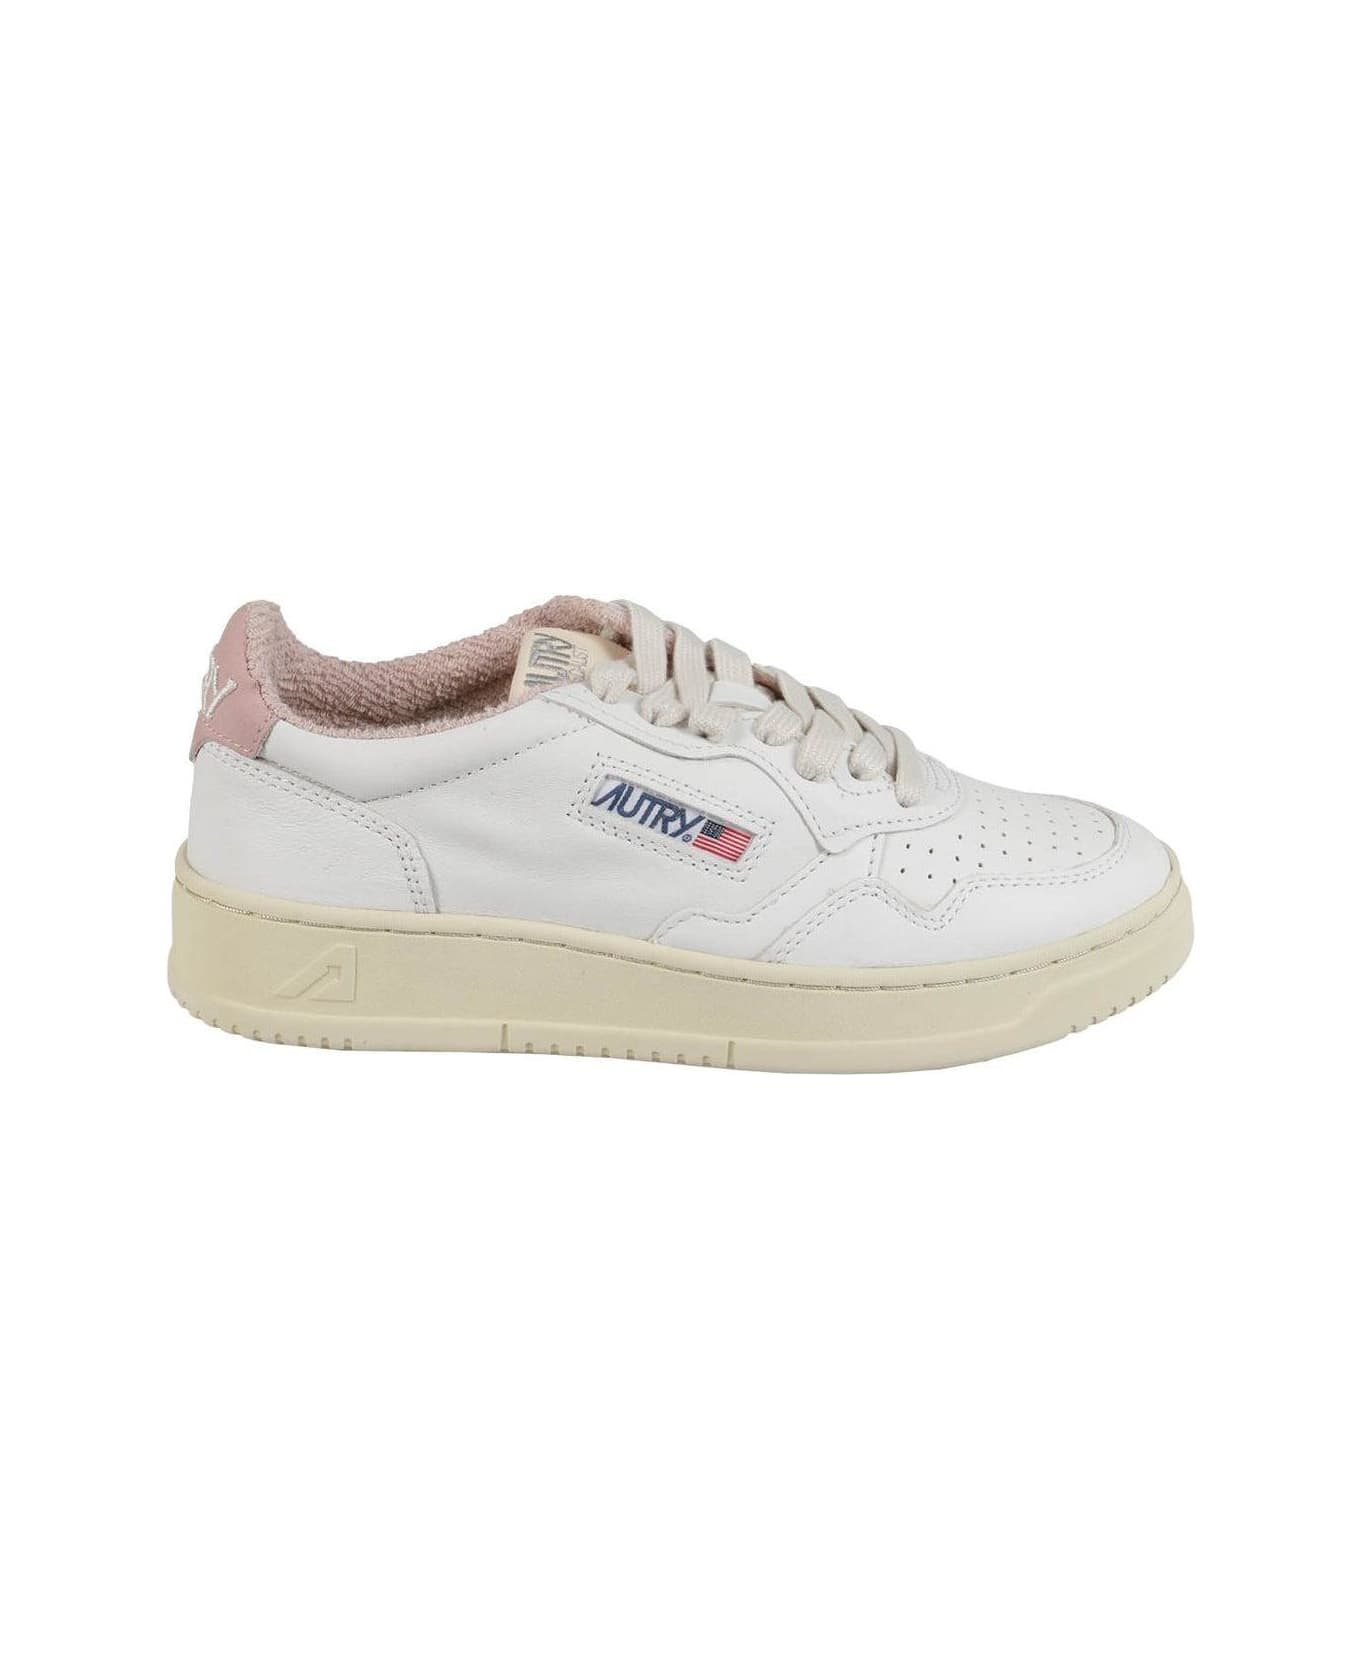 Autry Medalist Low Wom Sneakers - White Powder スニーカー